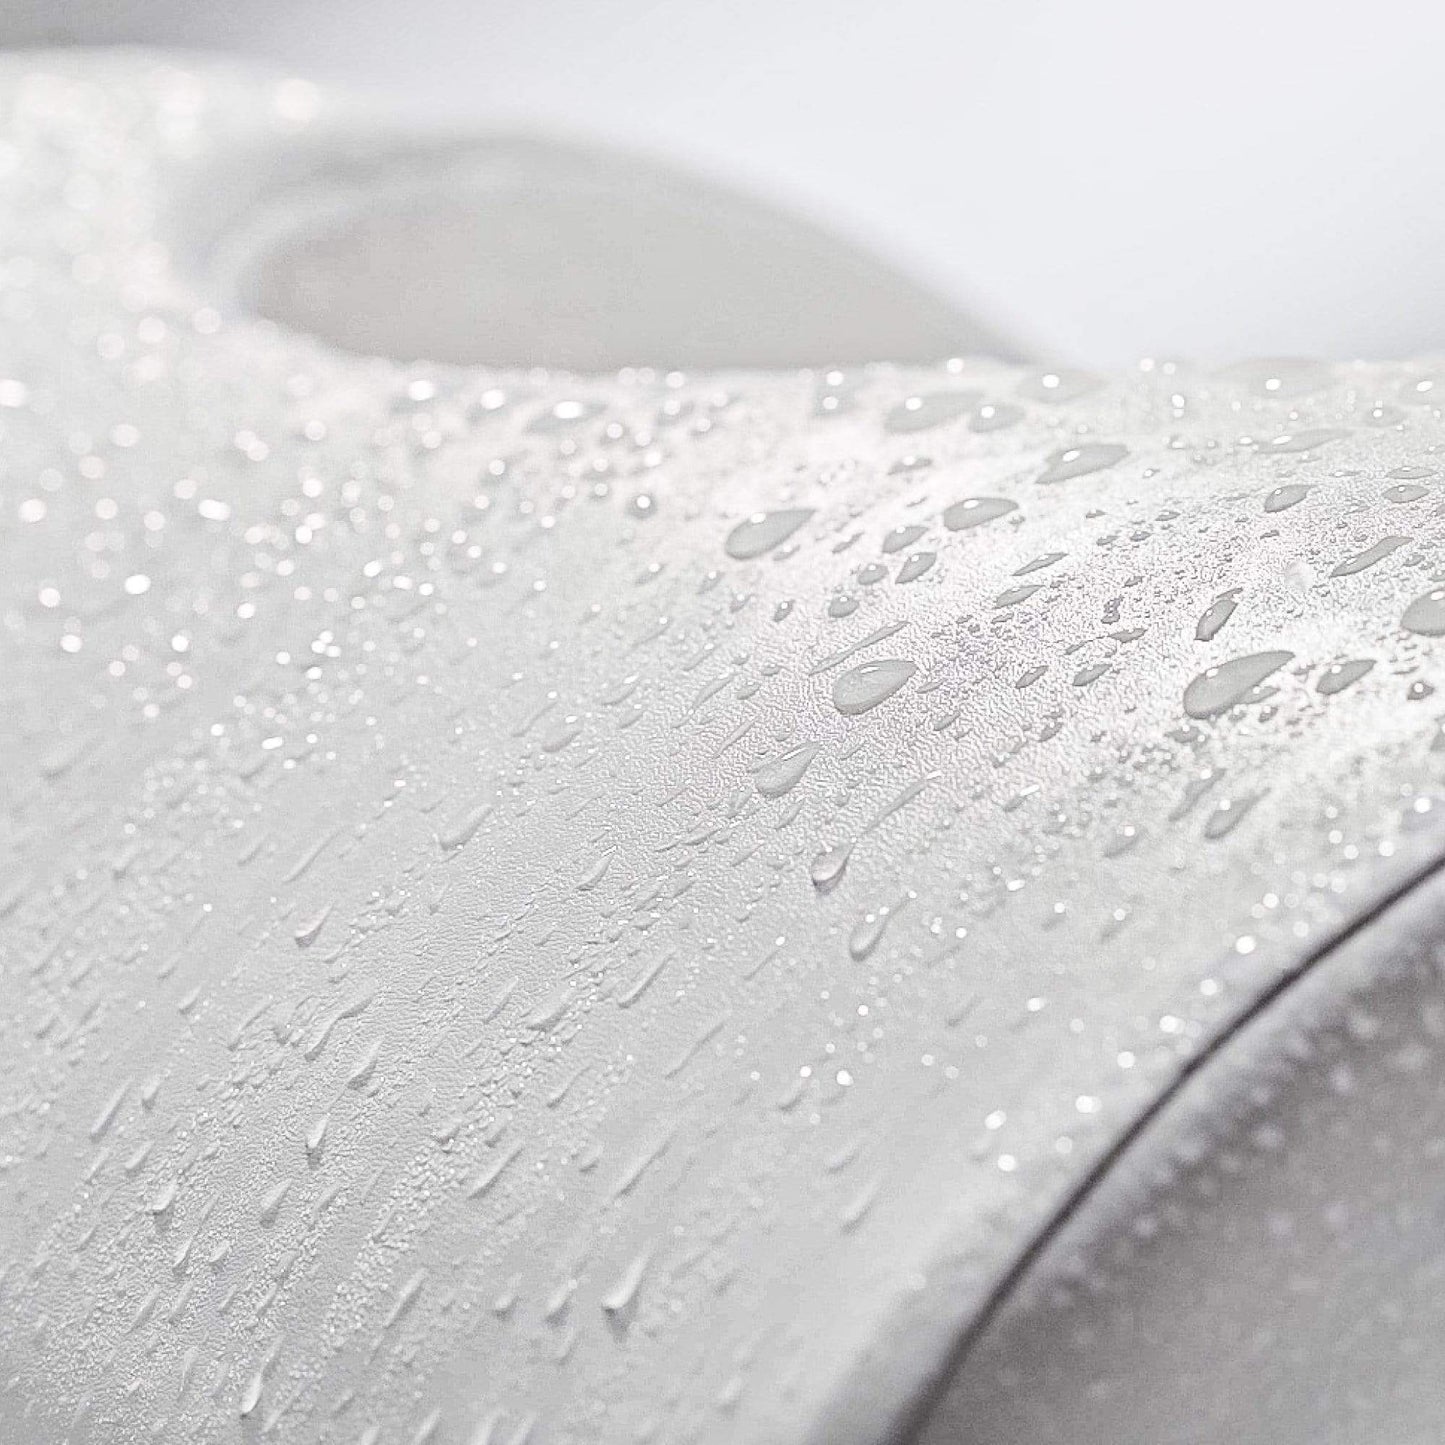 Waterdrops on the LUXE Footstool cover to showcase its waterproof feature